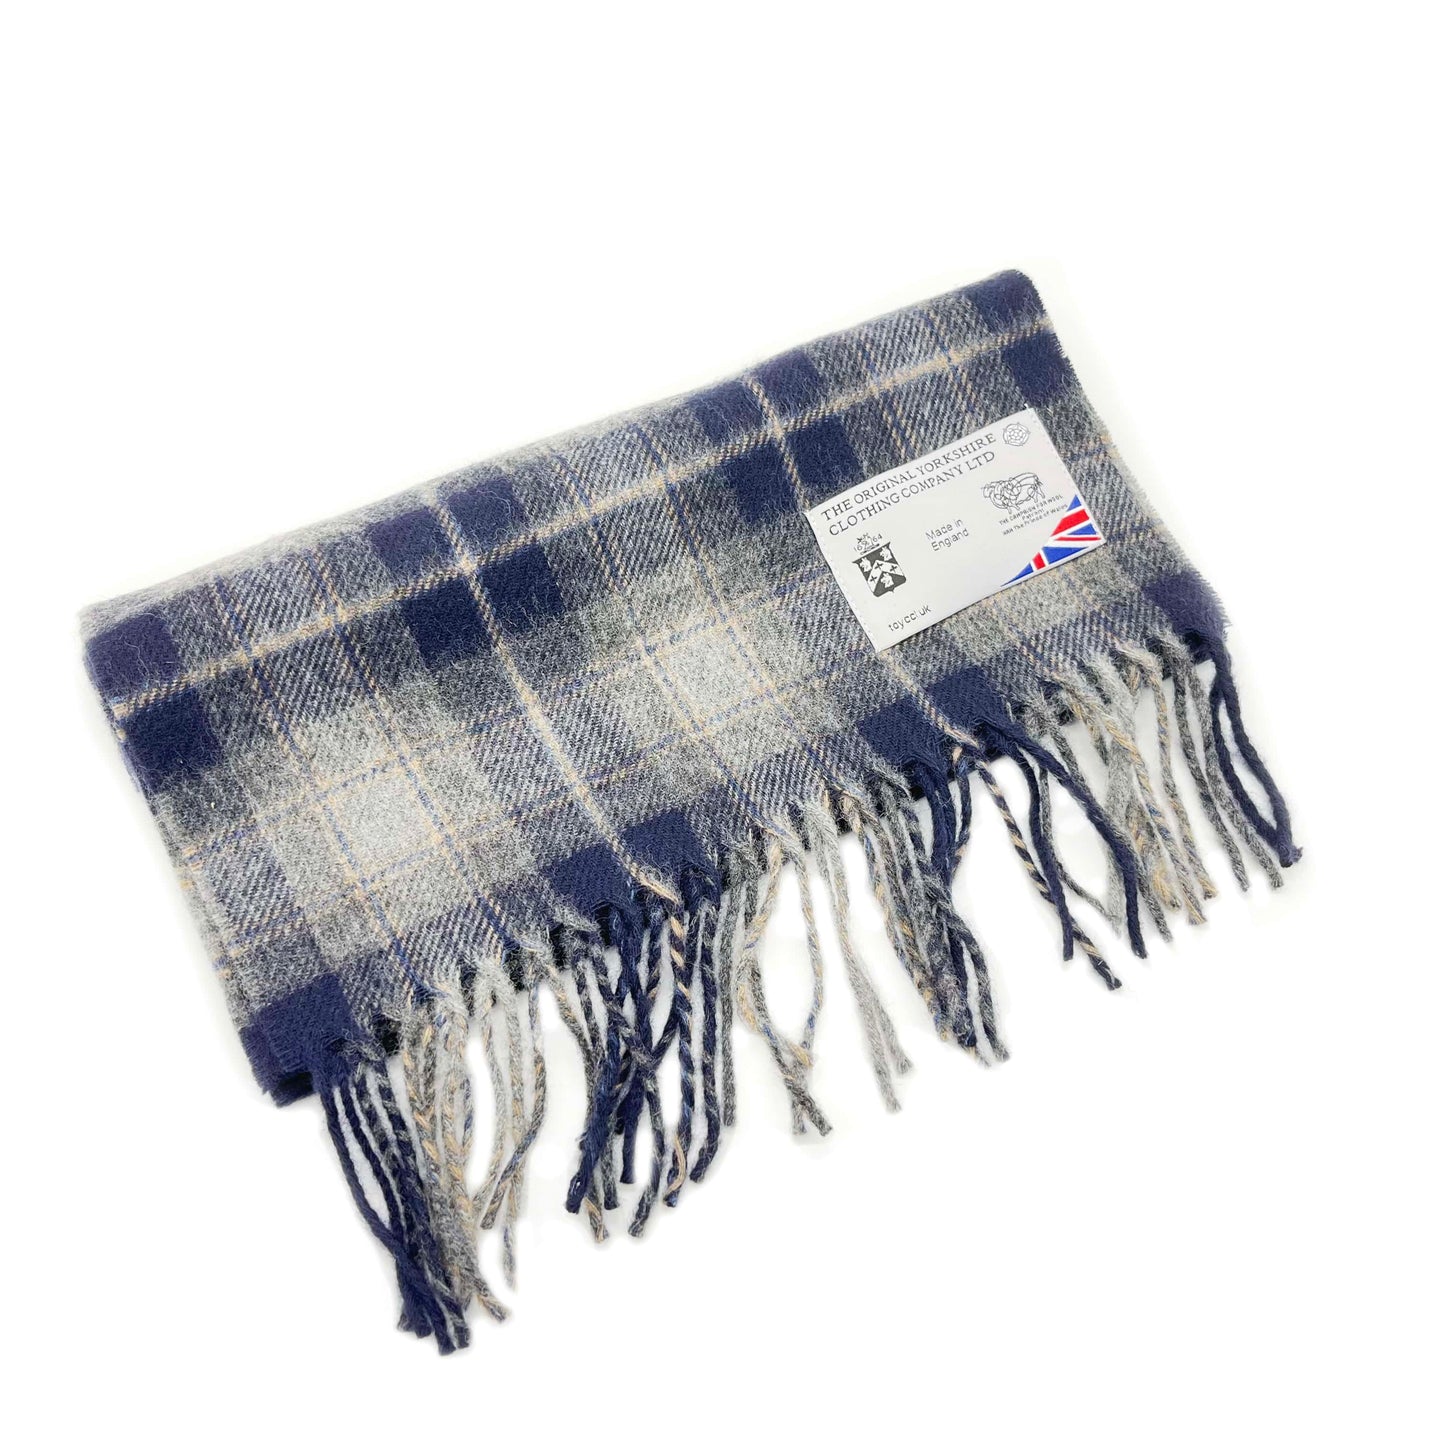 Traditional Yorkshire Wool Scarf Blue & Grey - The Great Yorkshire Shop